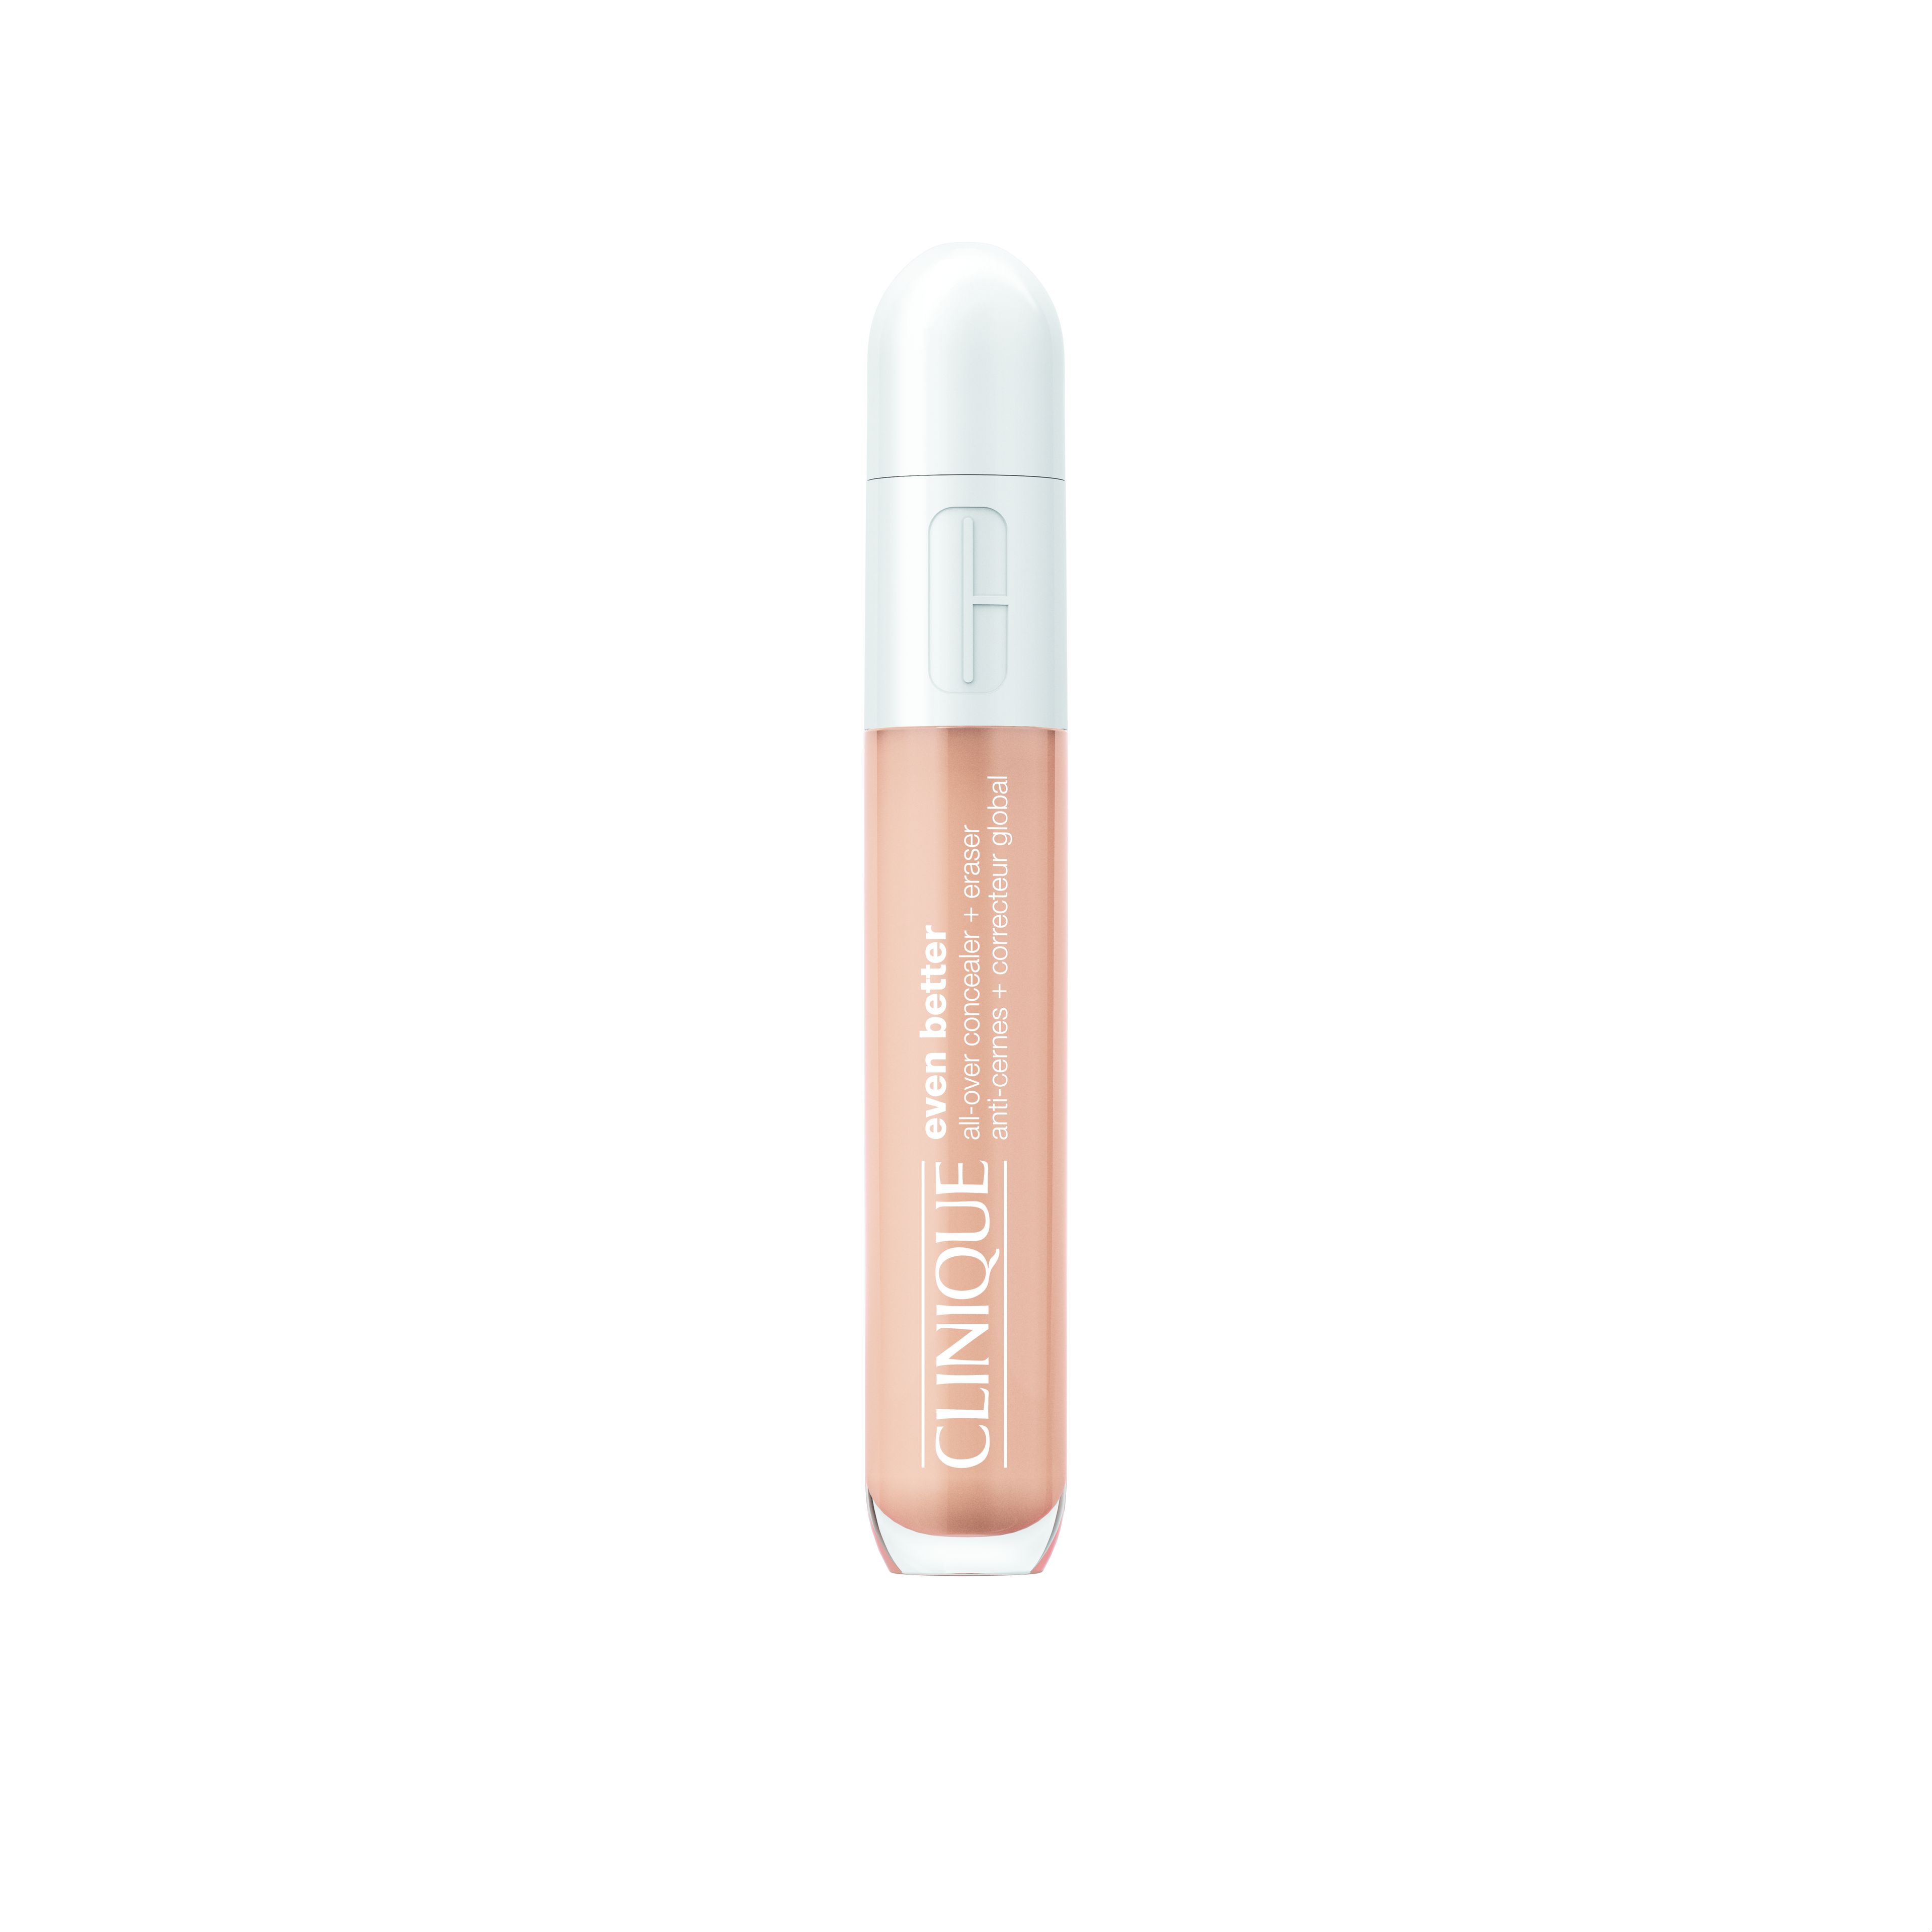 Clinique Even Better All Over Concealer 1